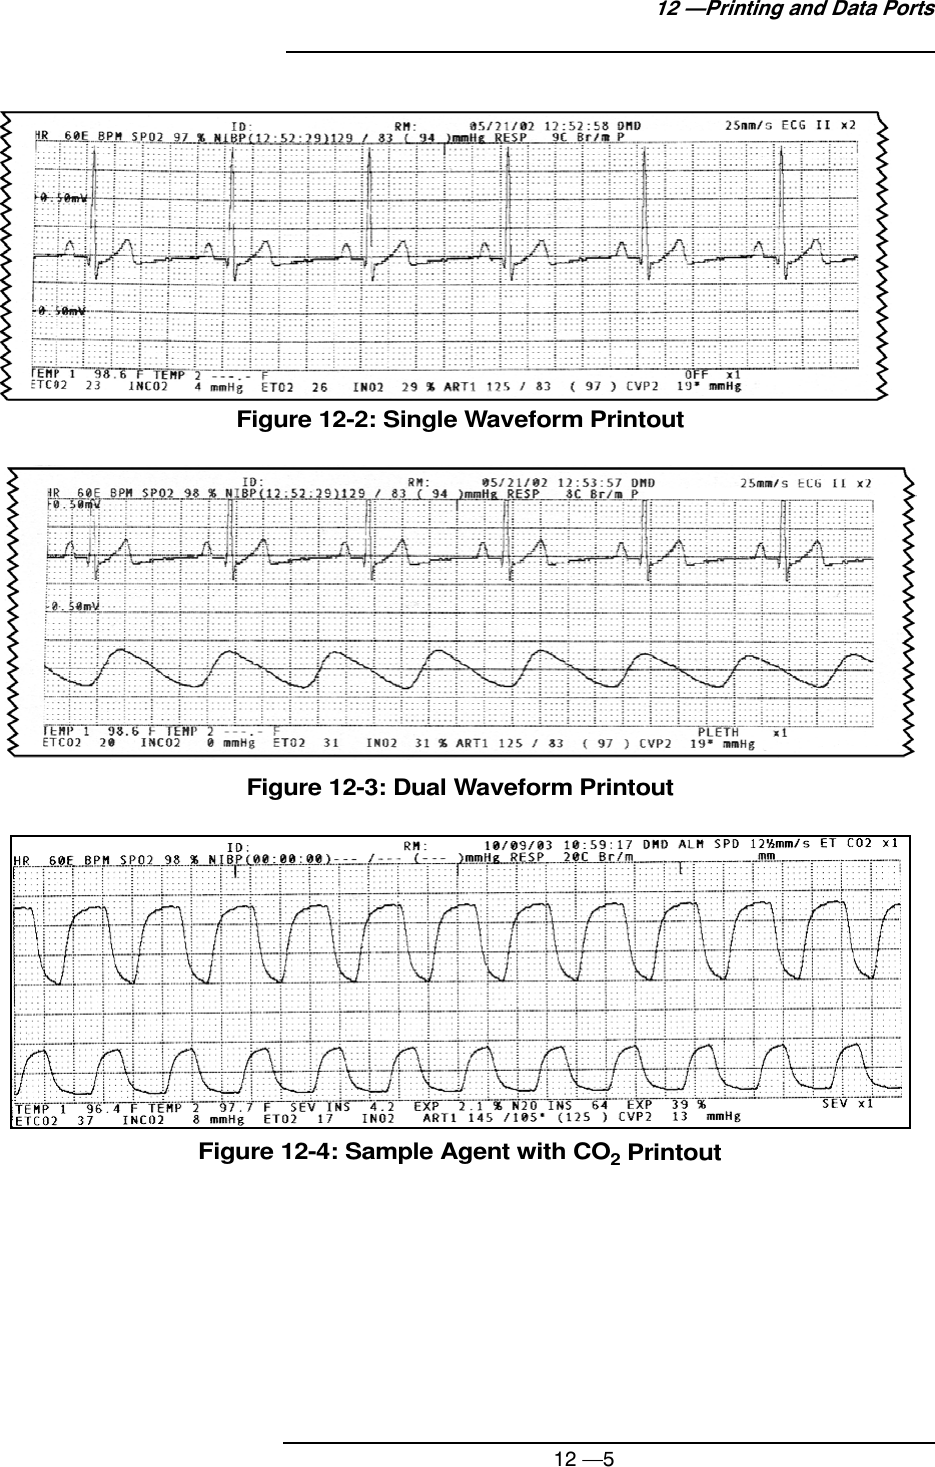 12 —512 —Printing and Data PortsFigure 12-2: Single Waveform PrintoutFigure 12-3: Dual Waveform PrintoutFigure 12-4: Sample Agent with CO2 Printout